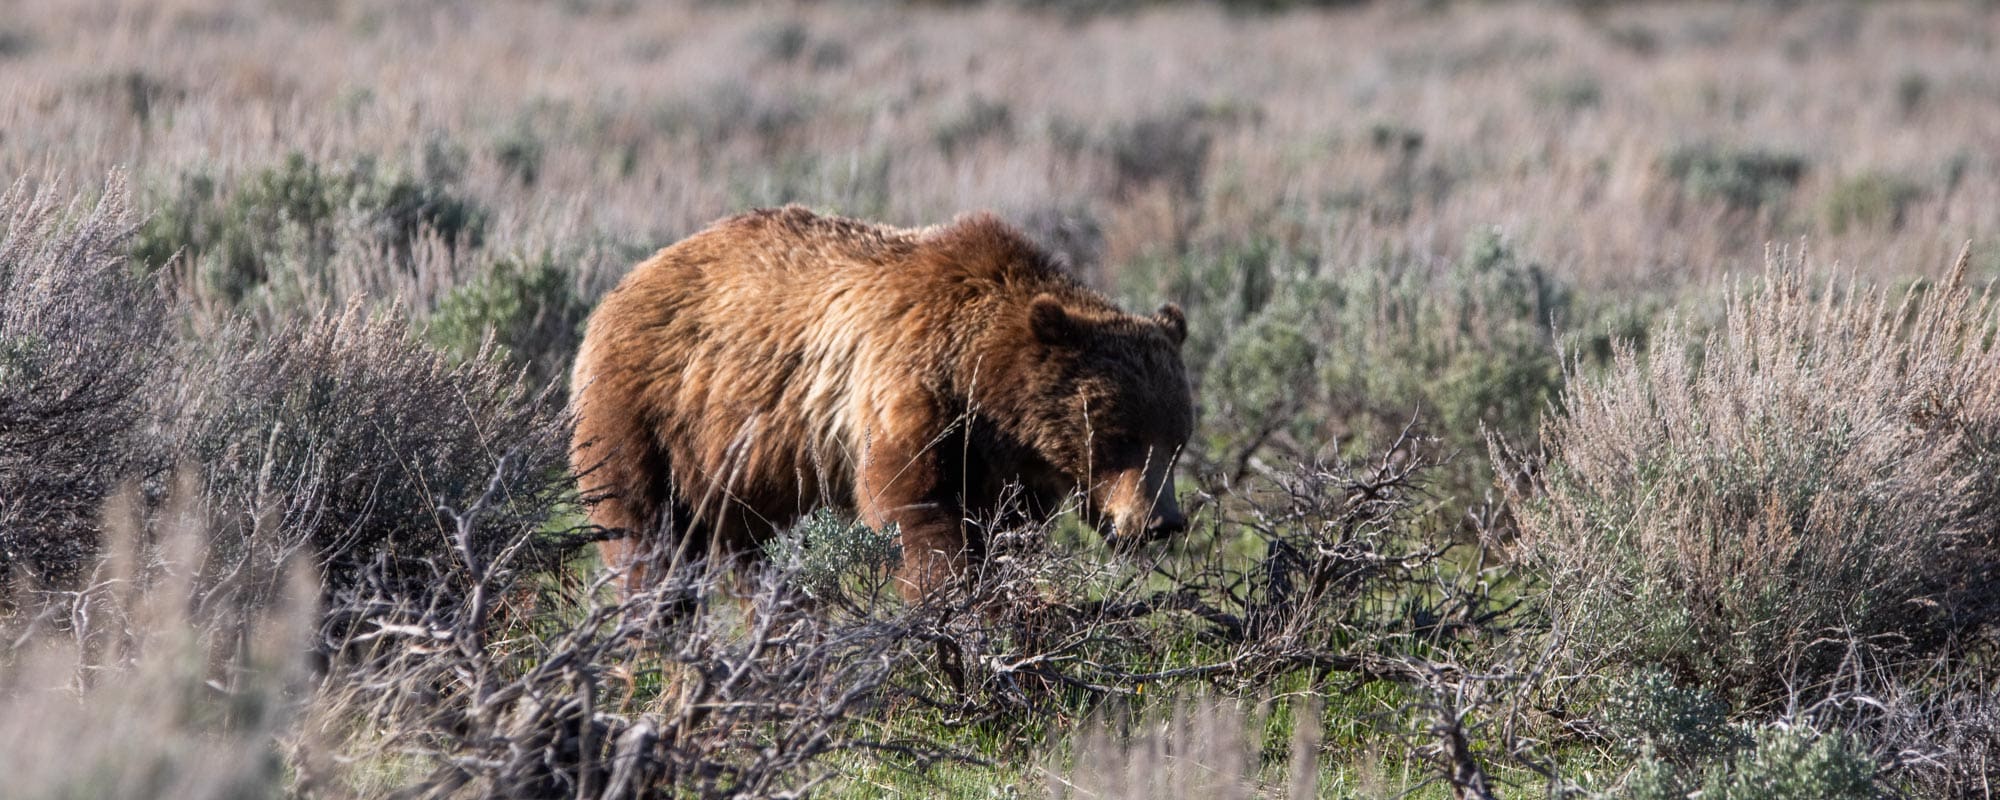 Grizzly bear 399 in Grand Teton National Park, Wyoming